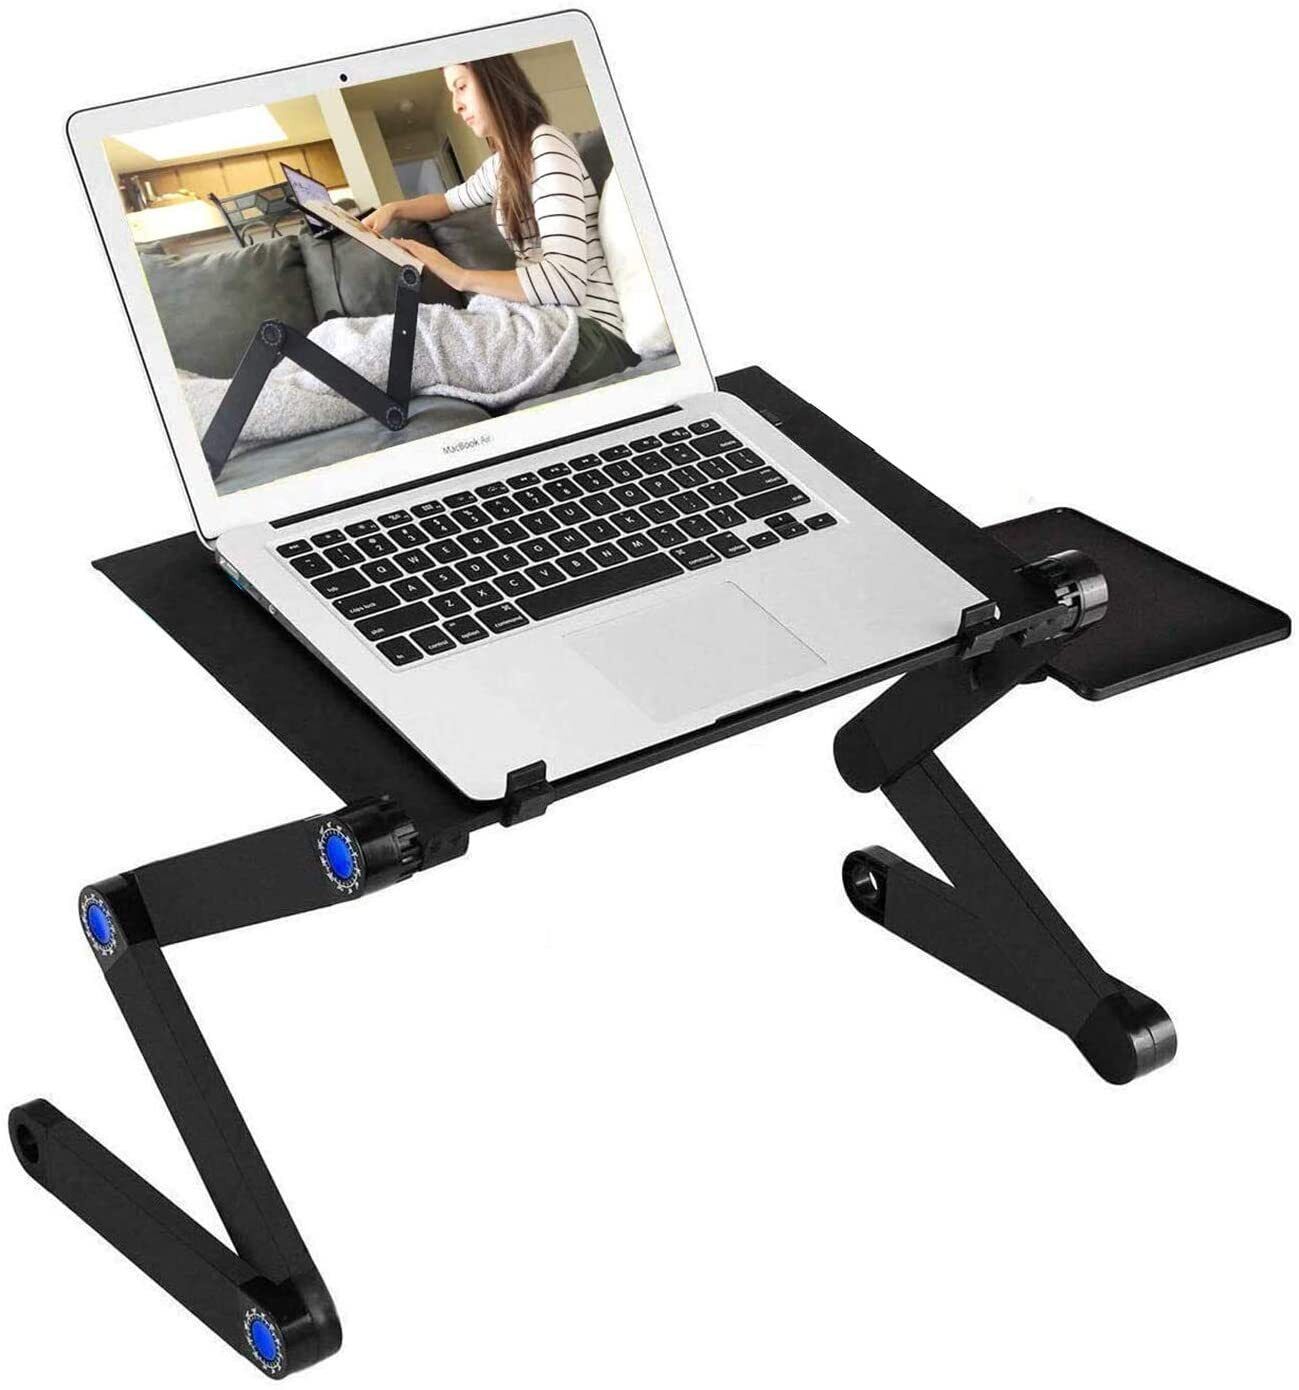 Primary image for Adjustable Laptop Stand, RAINBEAN Laptop Desk with 2 CPU Cooling USB Fans for Be